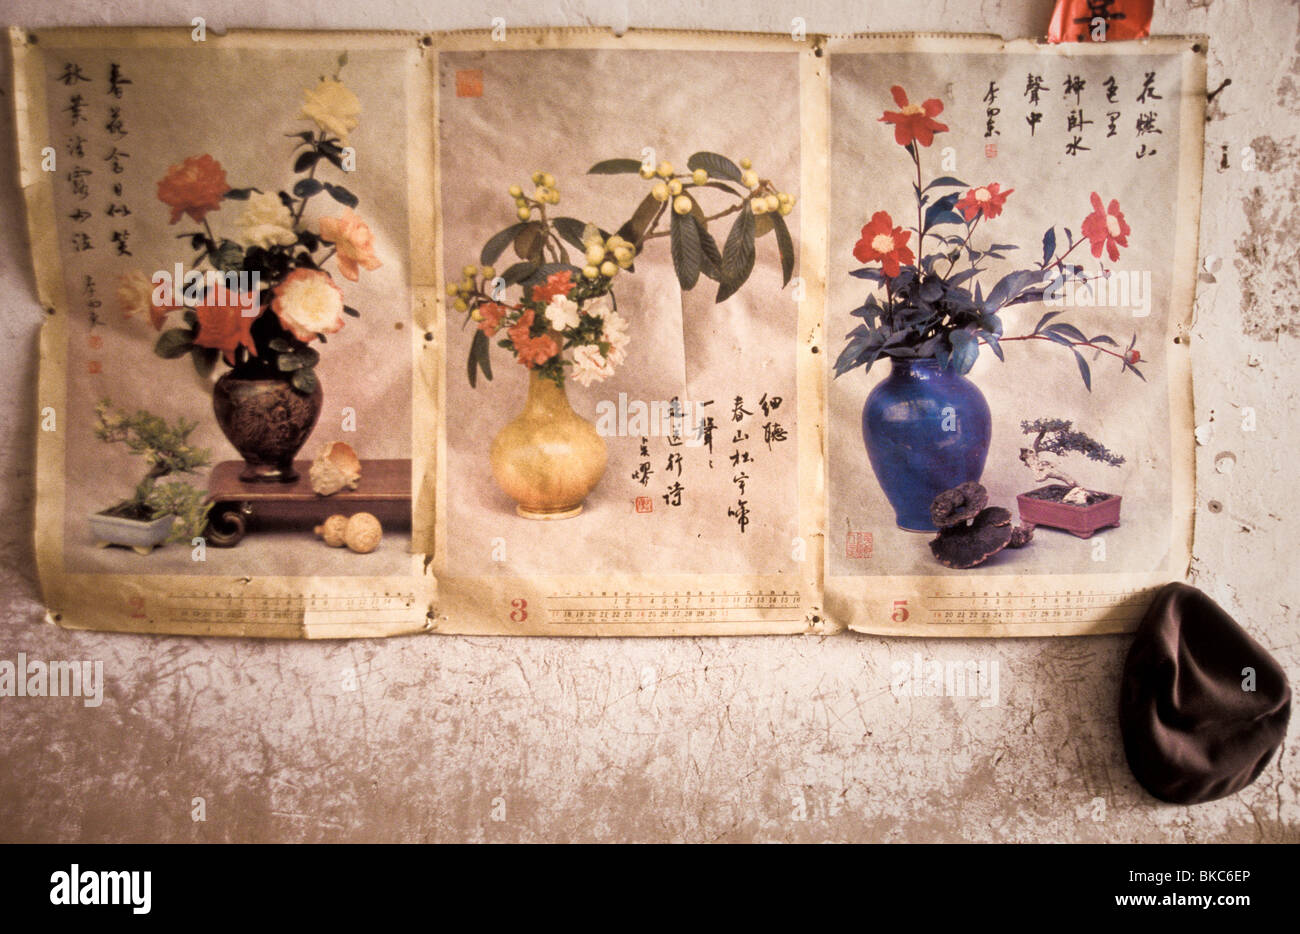 Poster calendar inside a cave dwelling house, Shaanxi province, China Stock Photo